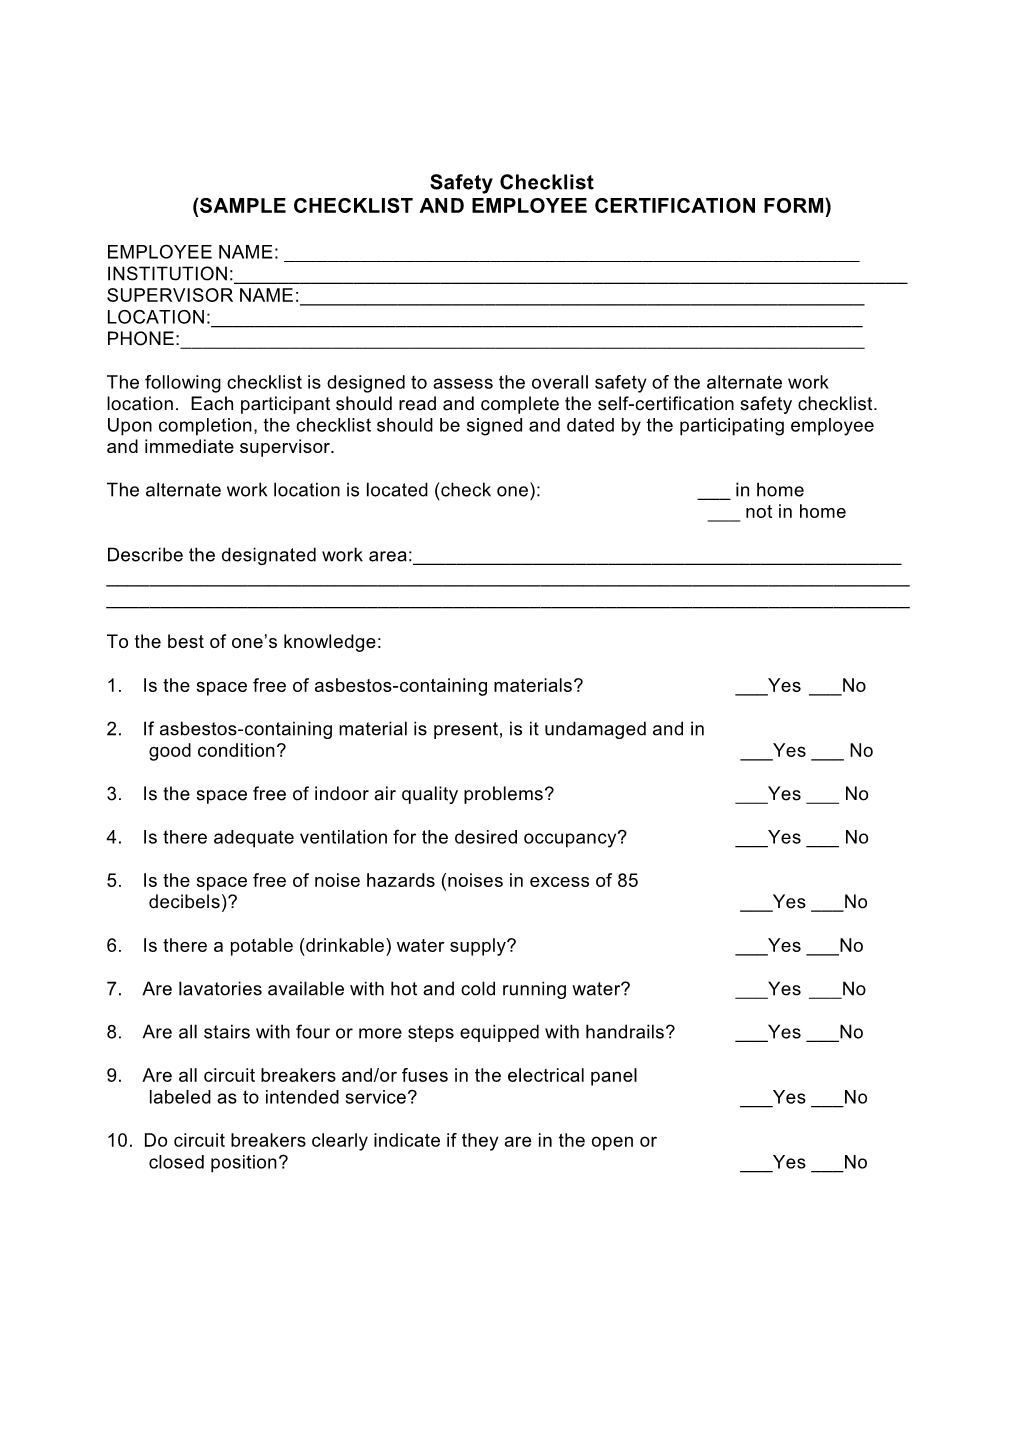 Sample Checklist and Employee Certification Form